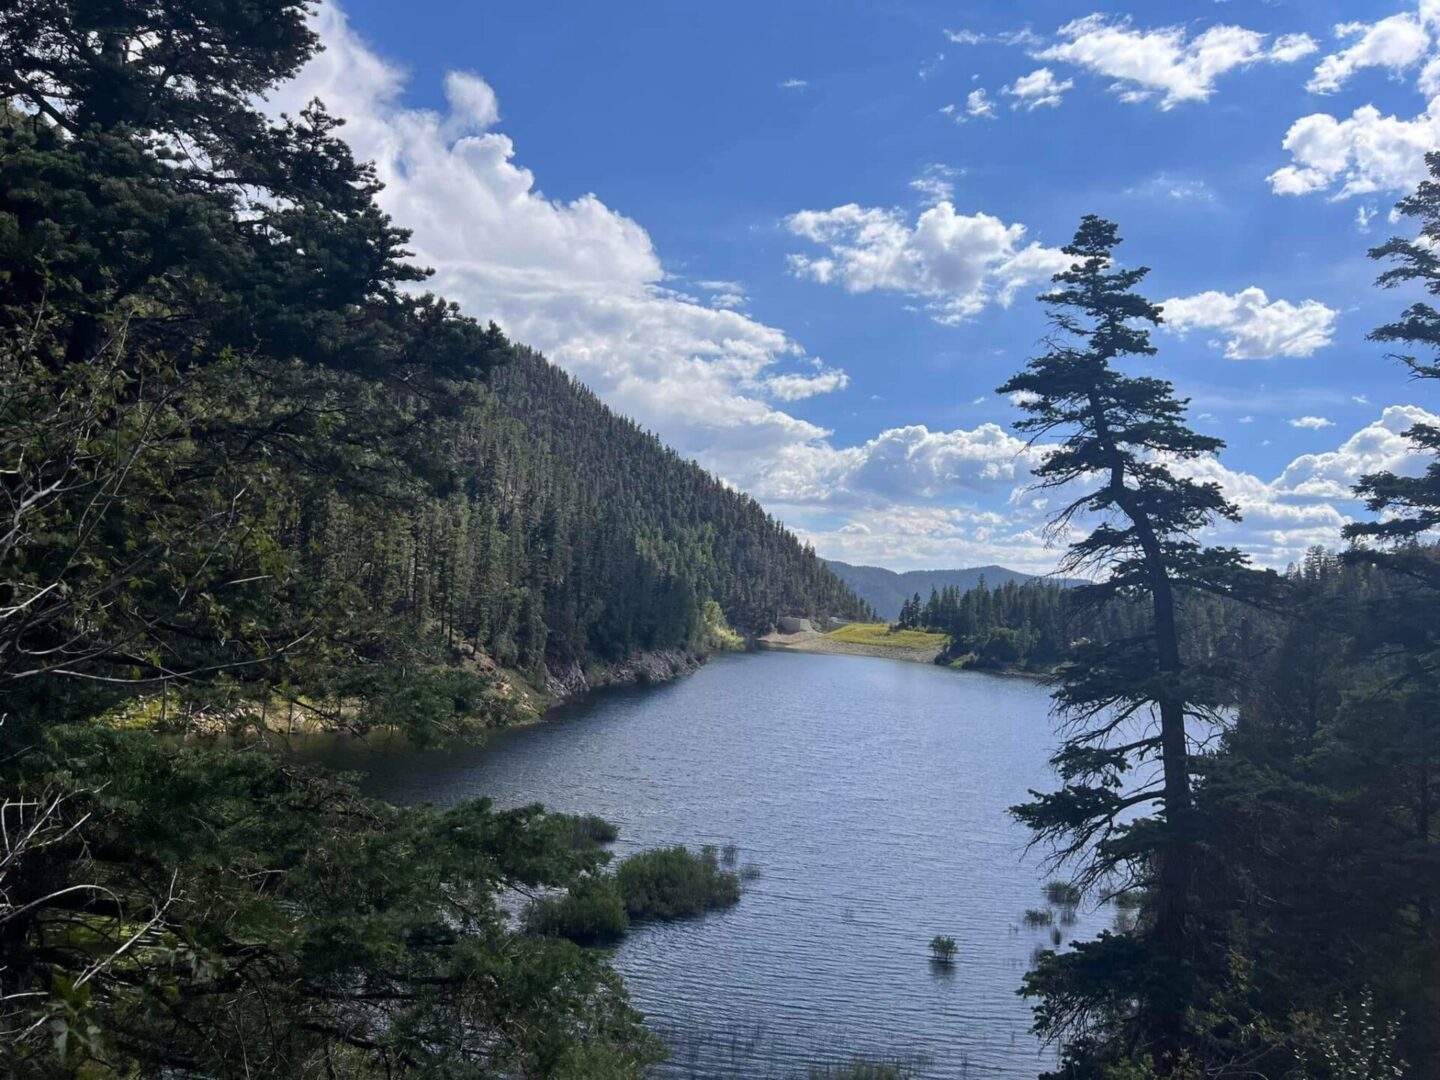 A body of water surrounded by trees and mountains.